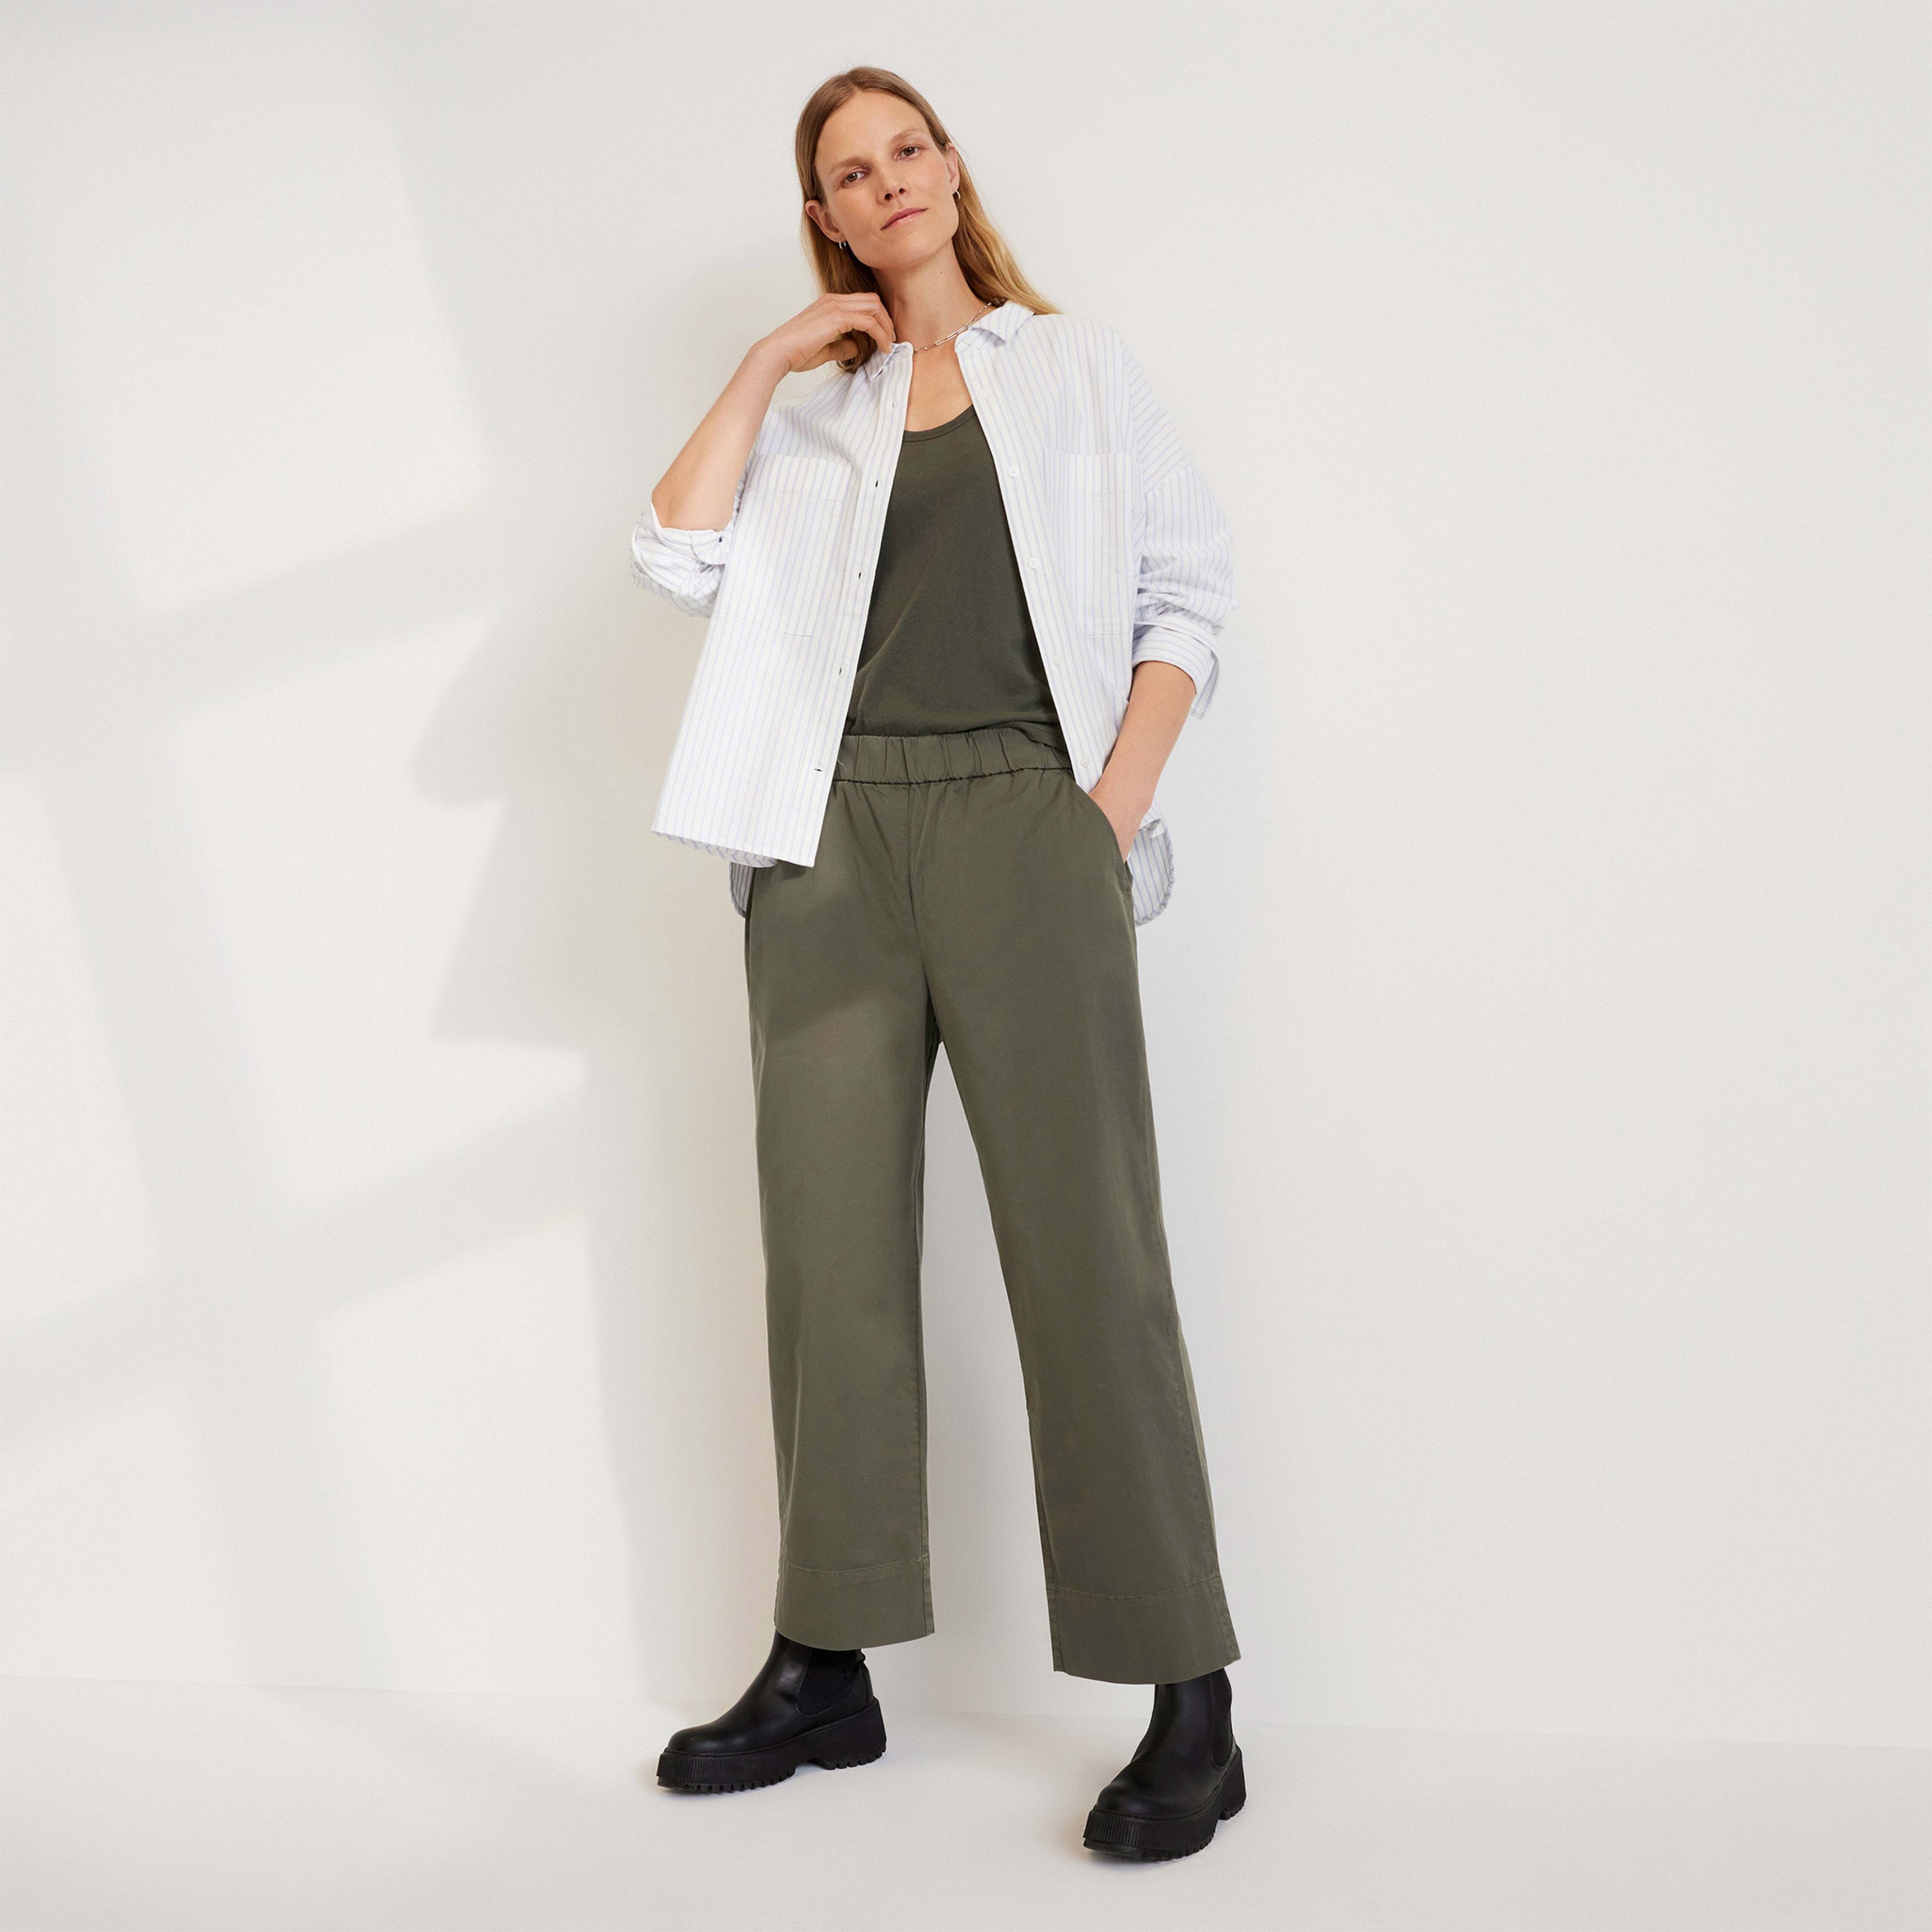 Womens Easy Pant by Everlane in Olive, Size XL Product Image